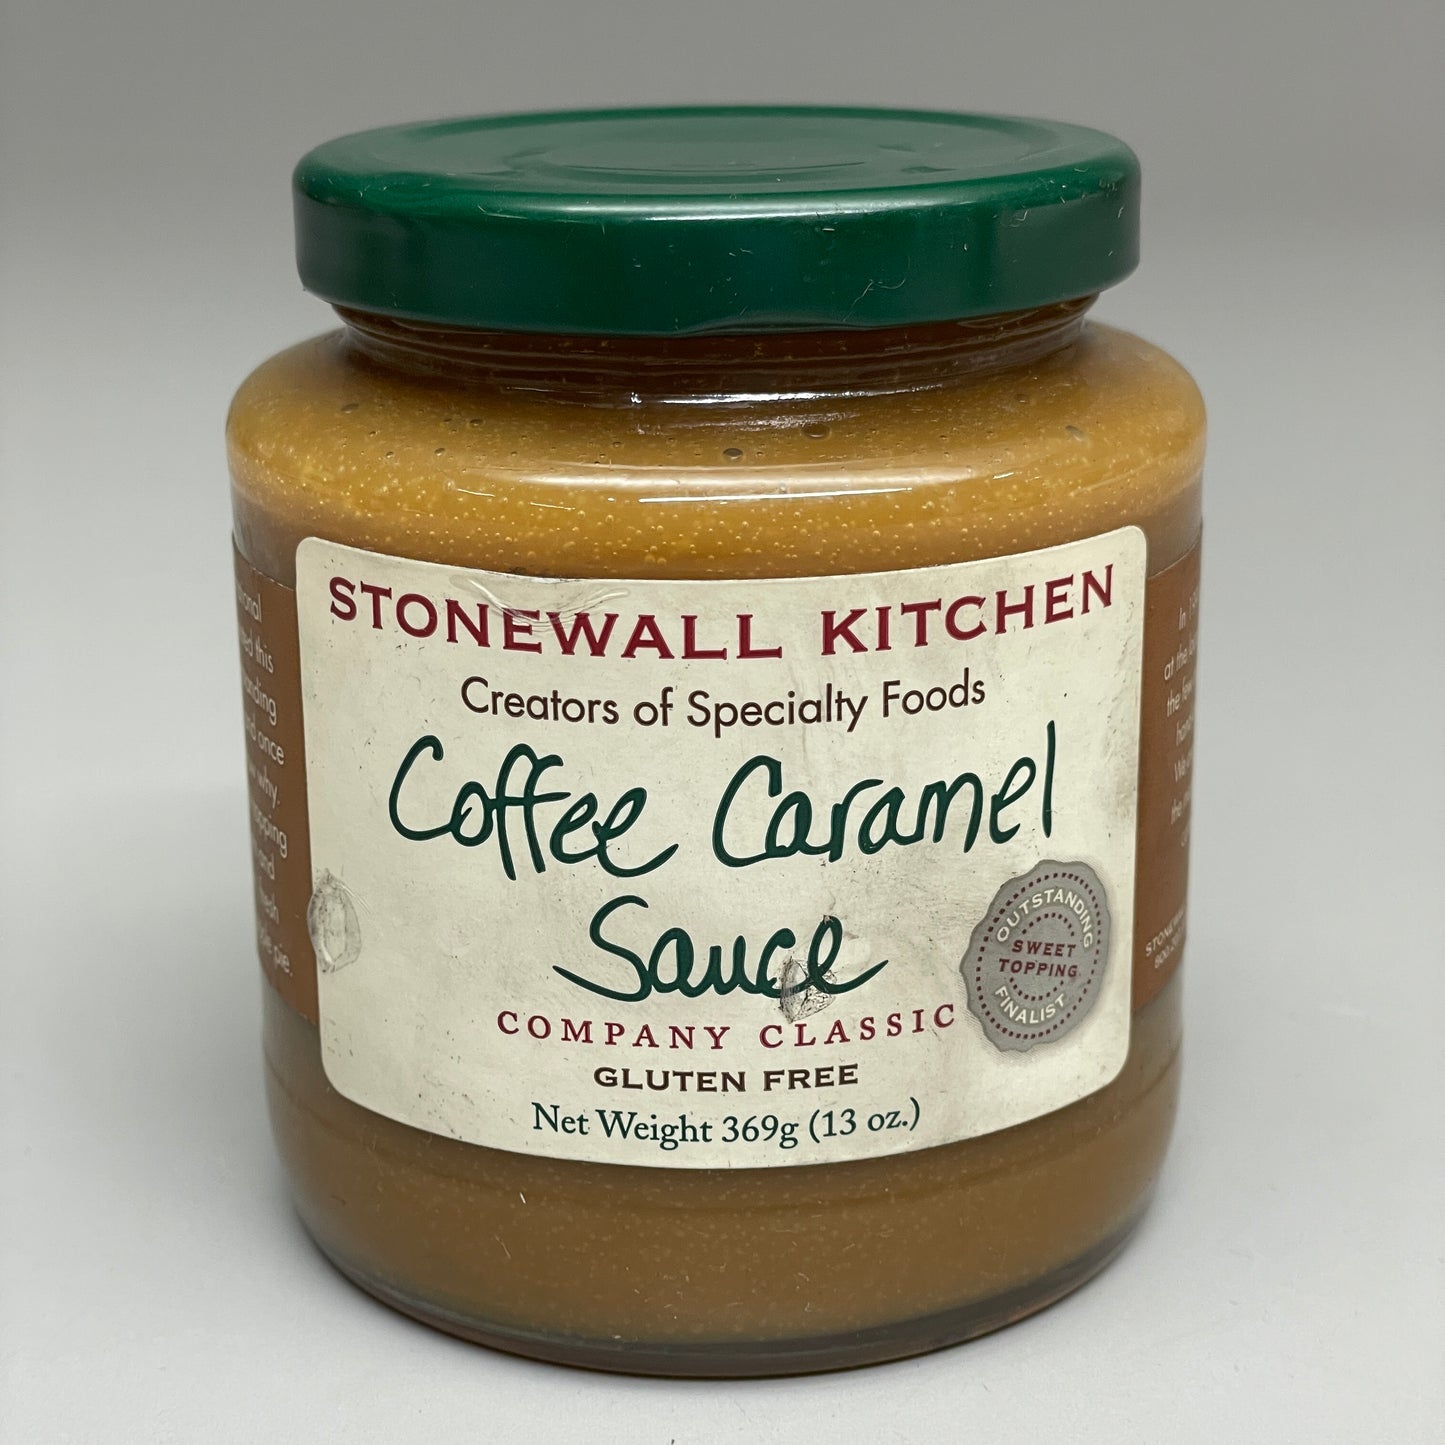 Z@ STONEWALL KITCHEN Coffee Caramel sauce Lot of 9 - 13 oz. Jars Best By 09/2024 (AS-IS New/Unopened)